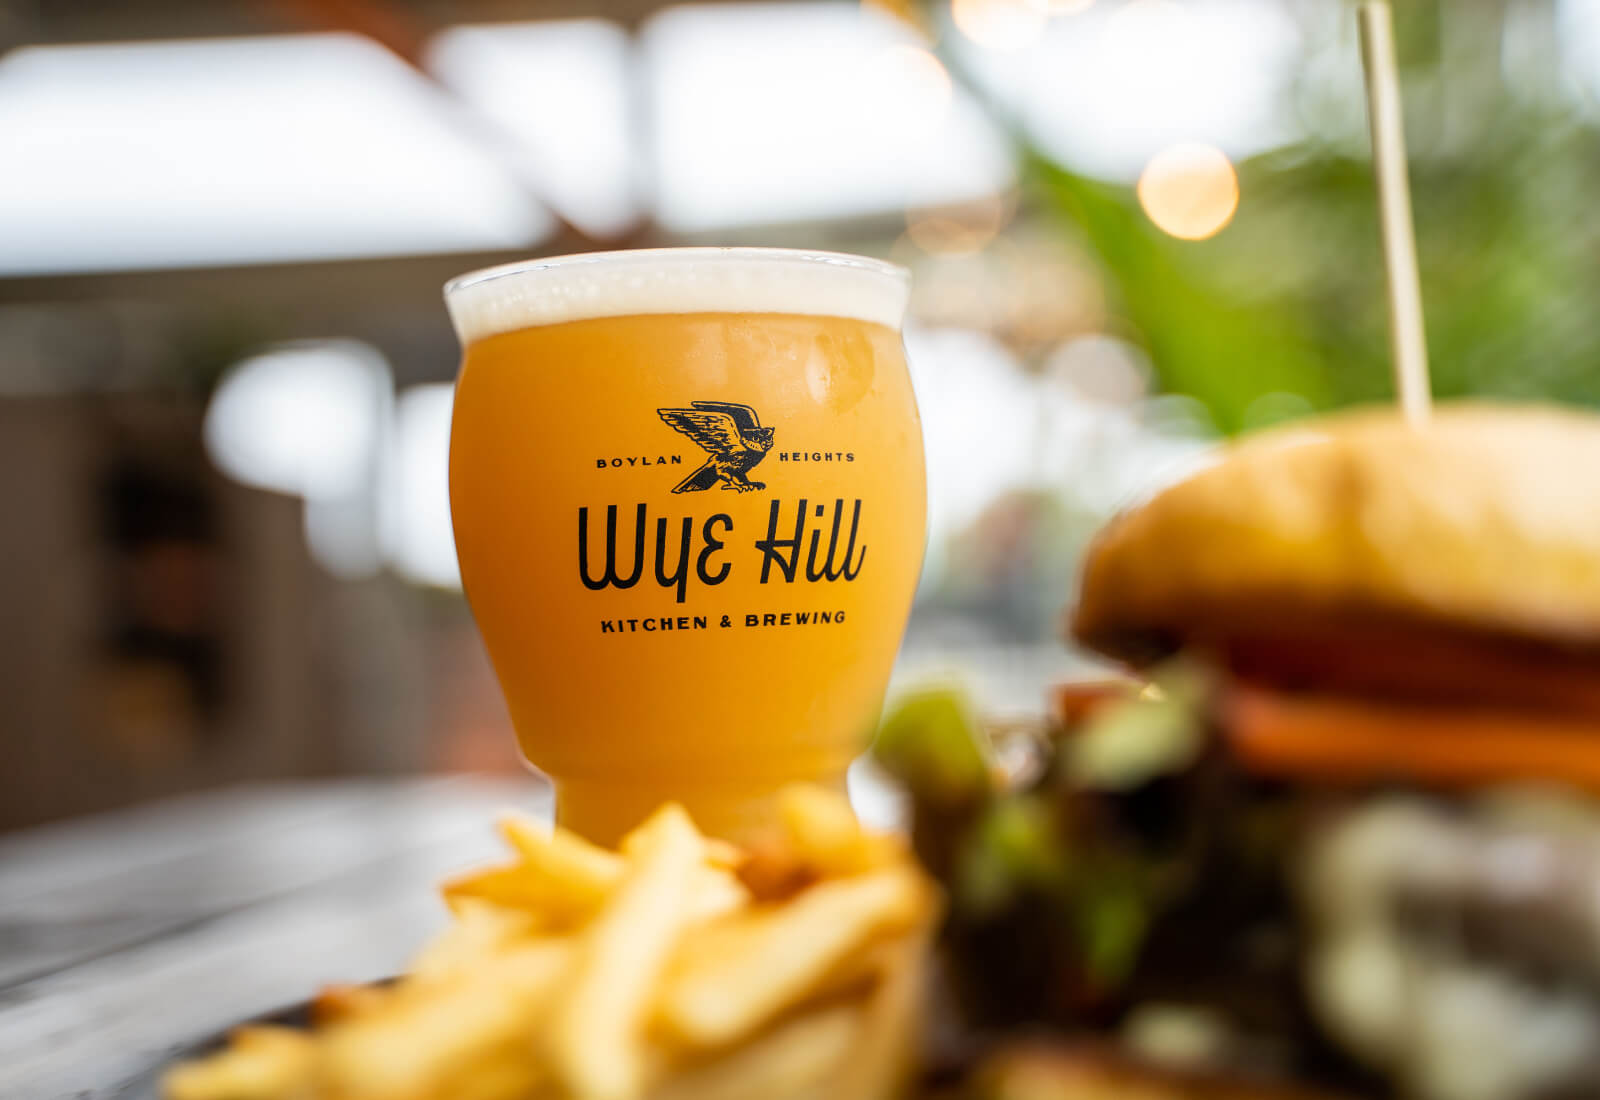 Branded Pint Glass | Brand Identity for Wye Hill Kitchen and Brewing in Raleigh, NC